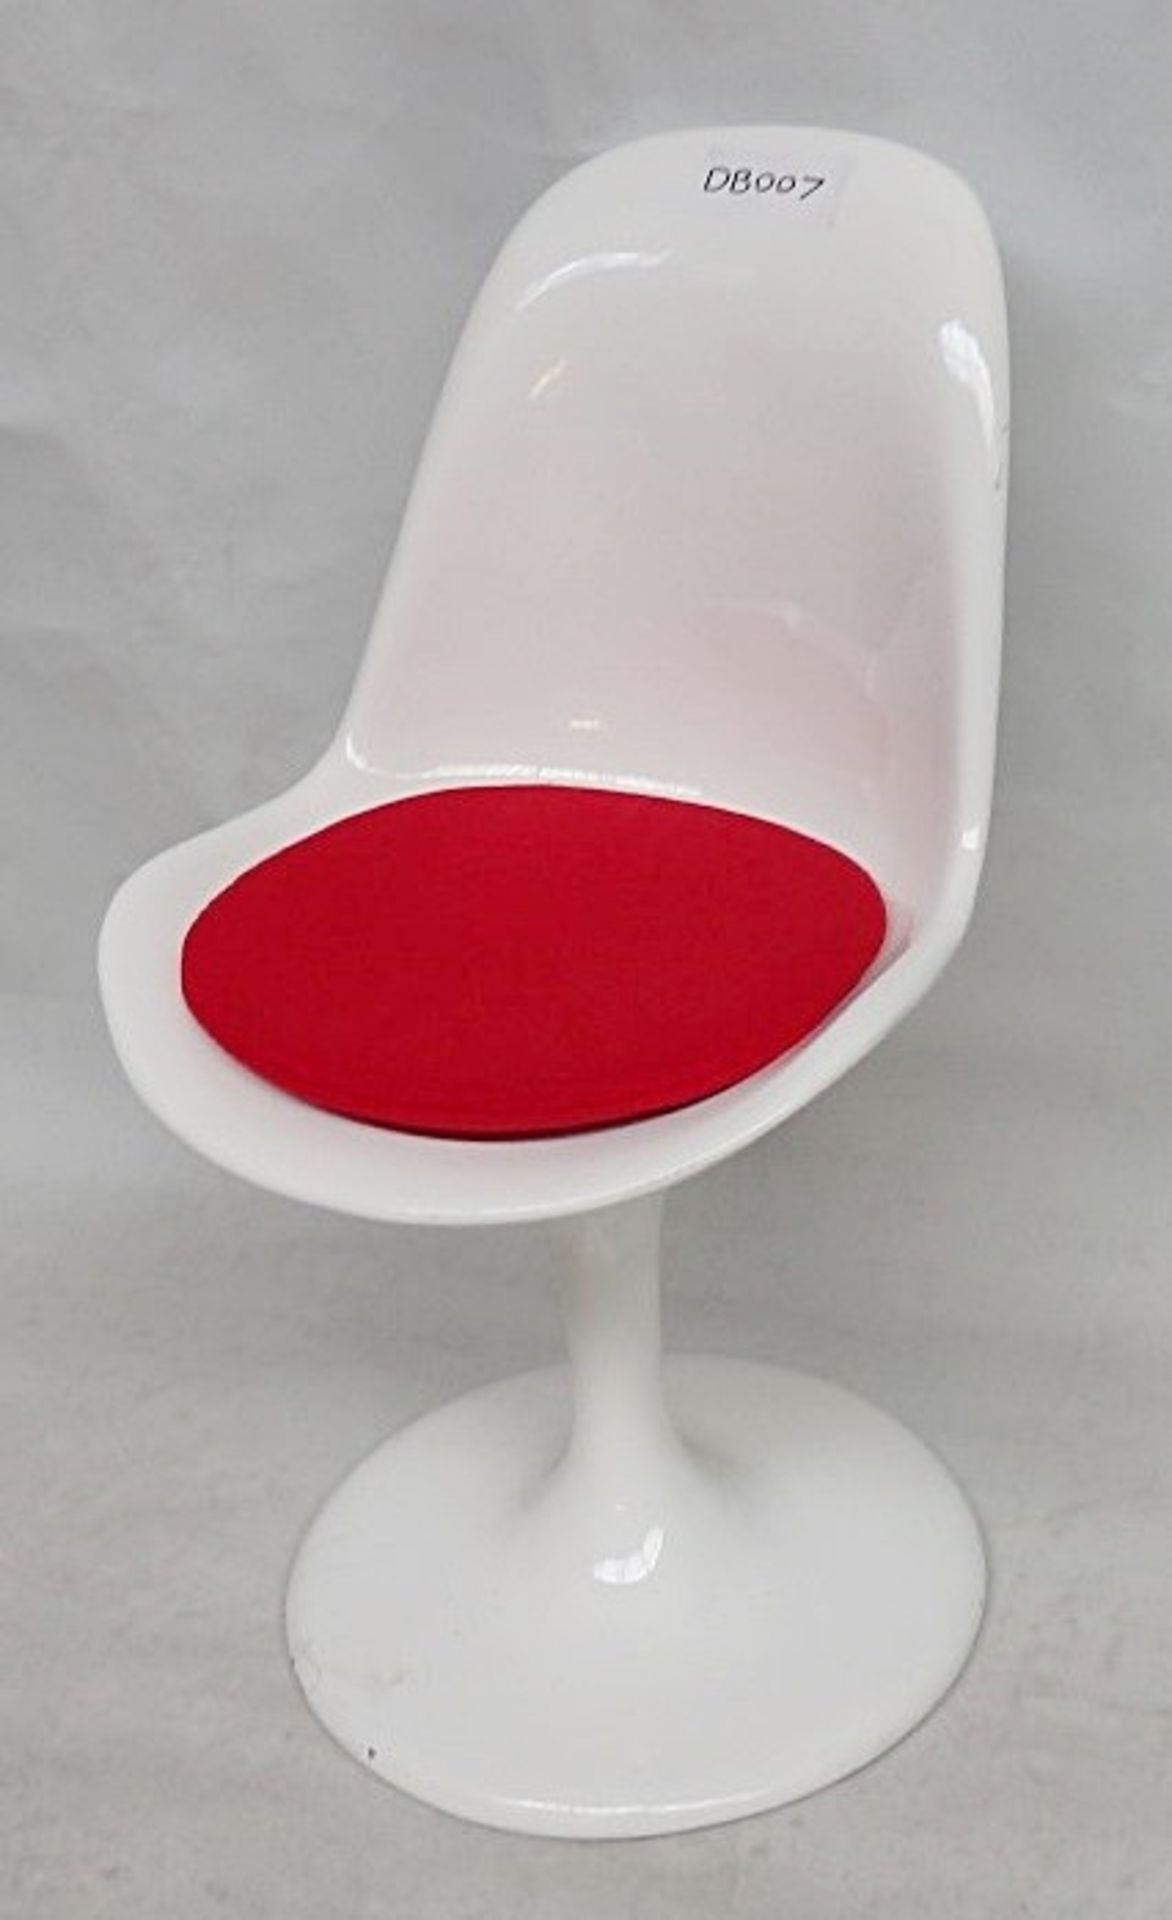 1 x Retro Style Swivel Chair With A White Hi-gloss Finish - Includes Cushion As Shown - - Image 4 of 7